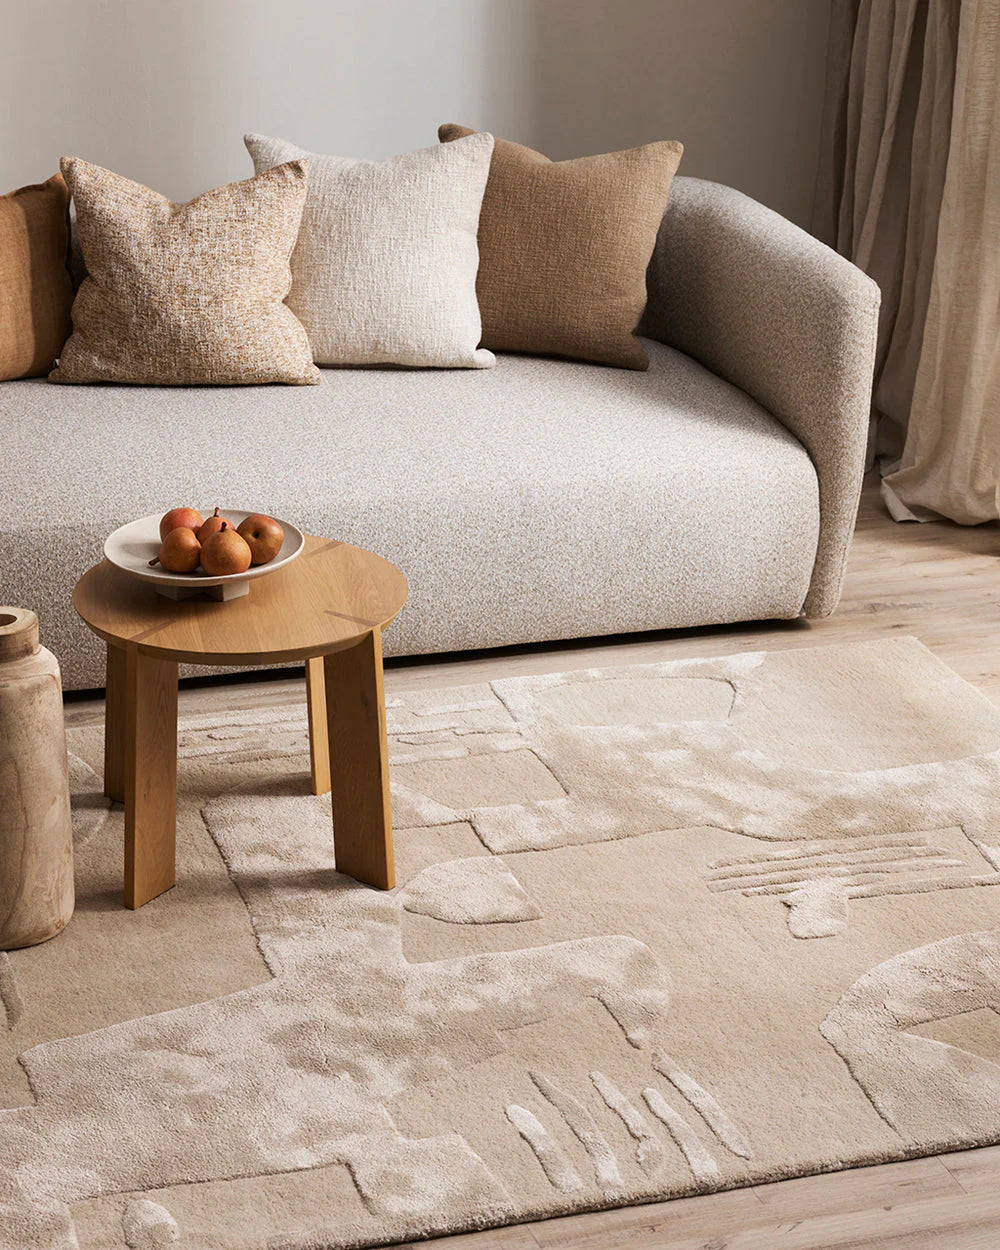 Paolo Floor Rug from Baya Furtex Stockist Make Your House A Home, Furniture Store Bendigo. Free Australia Wide Delivery. Mulberi Rugs.